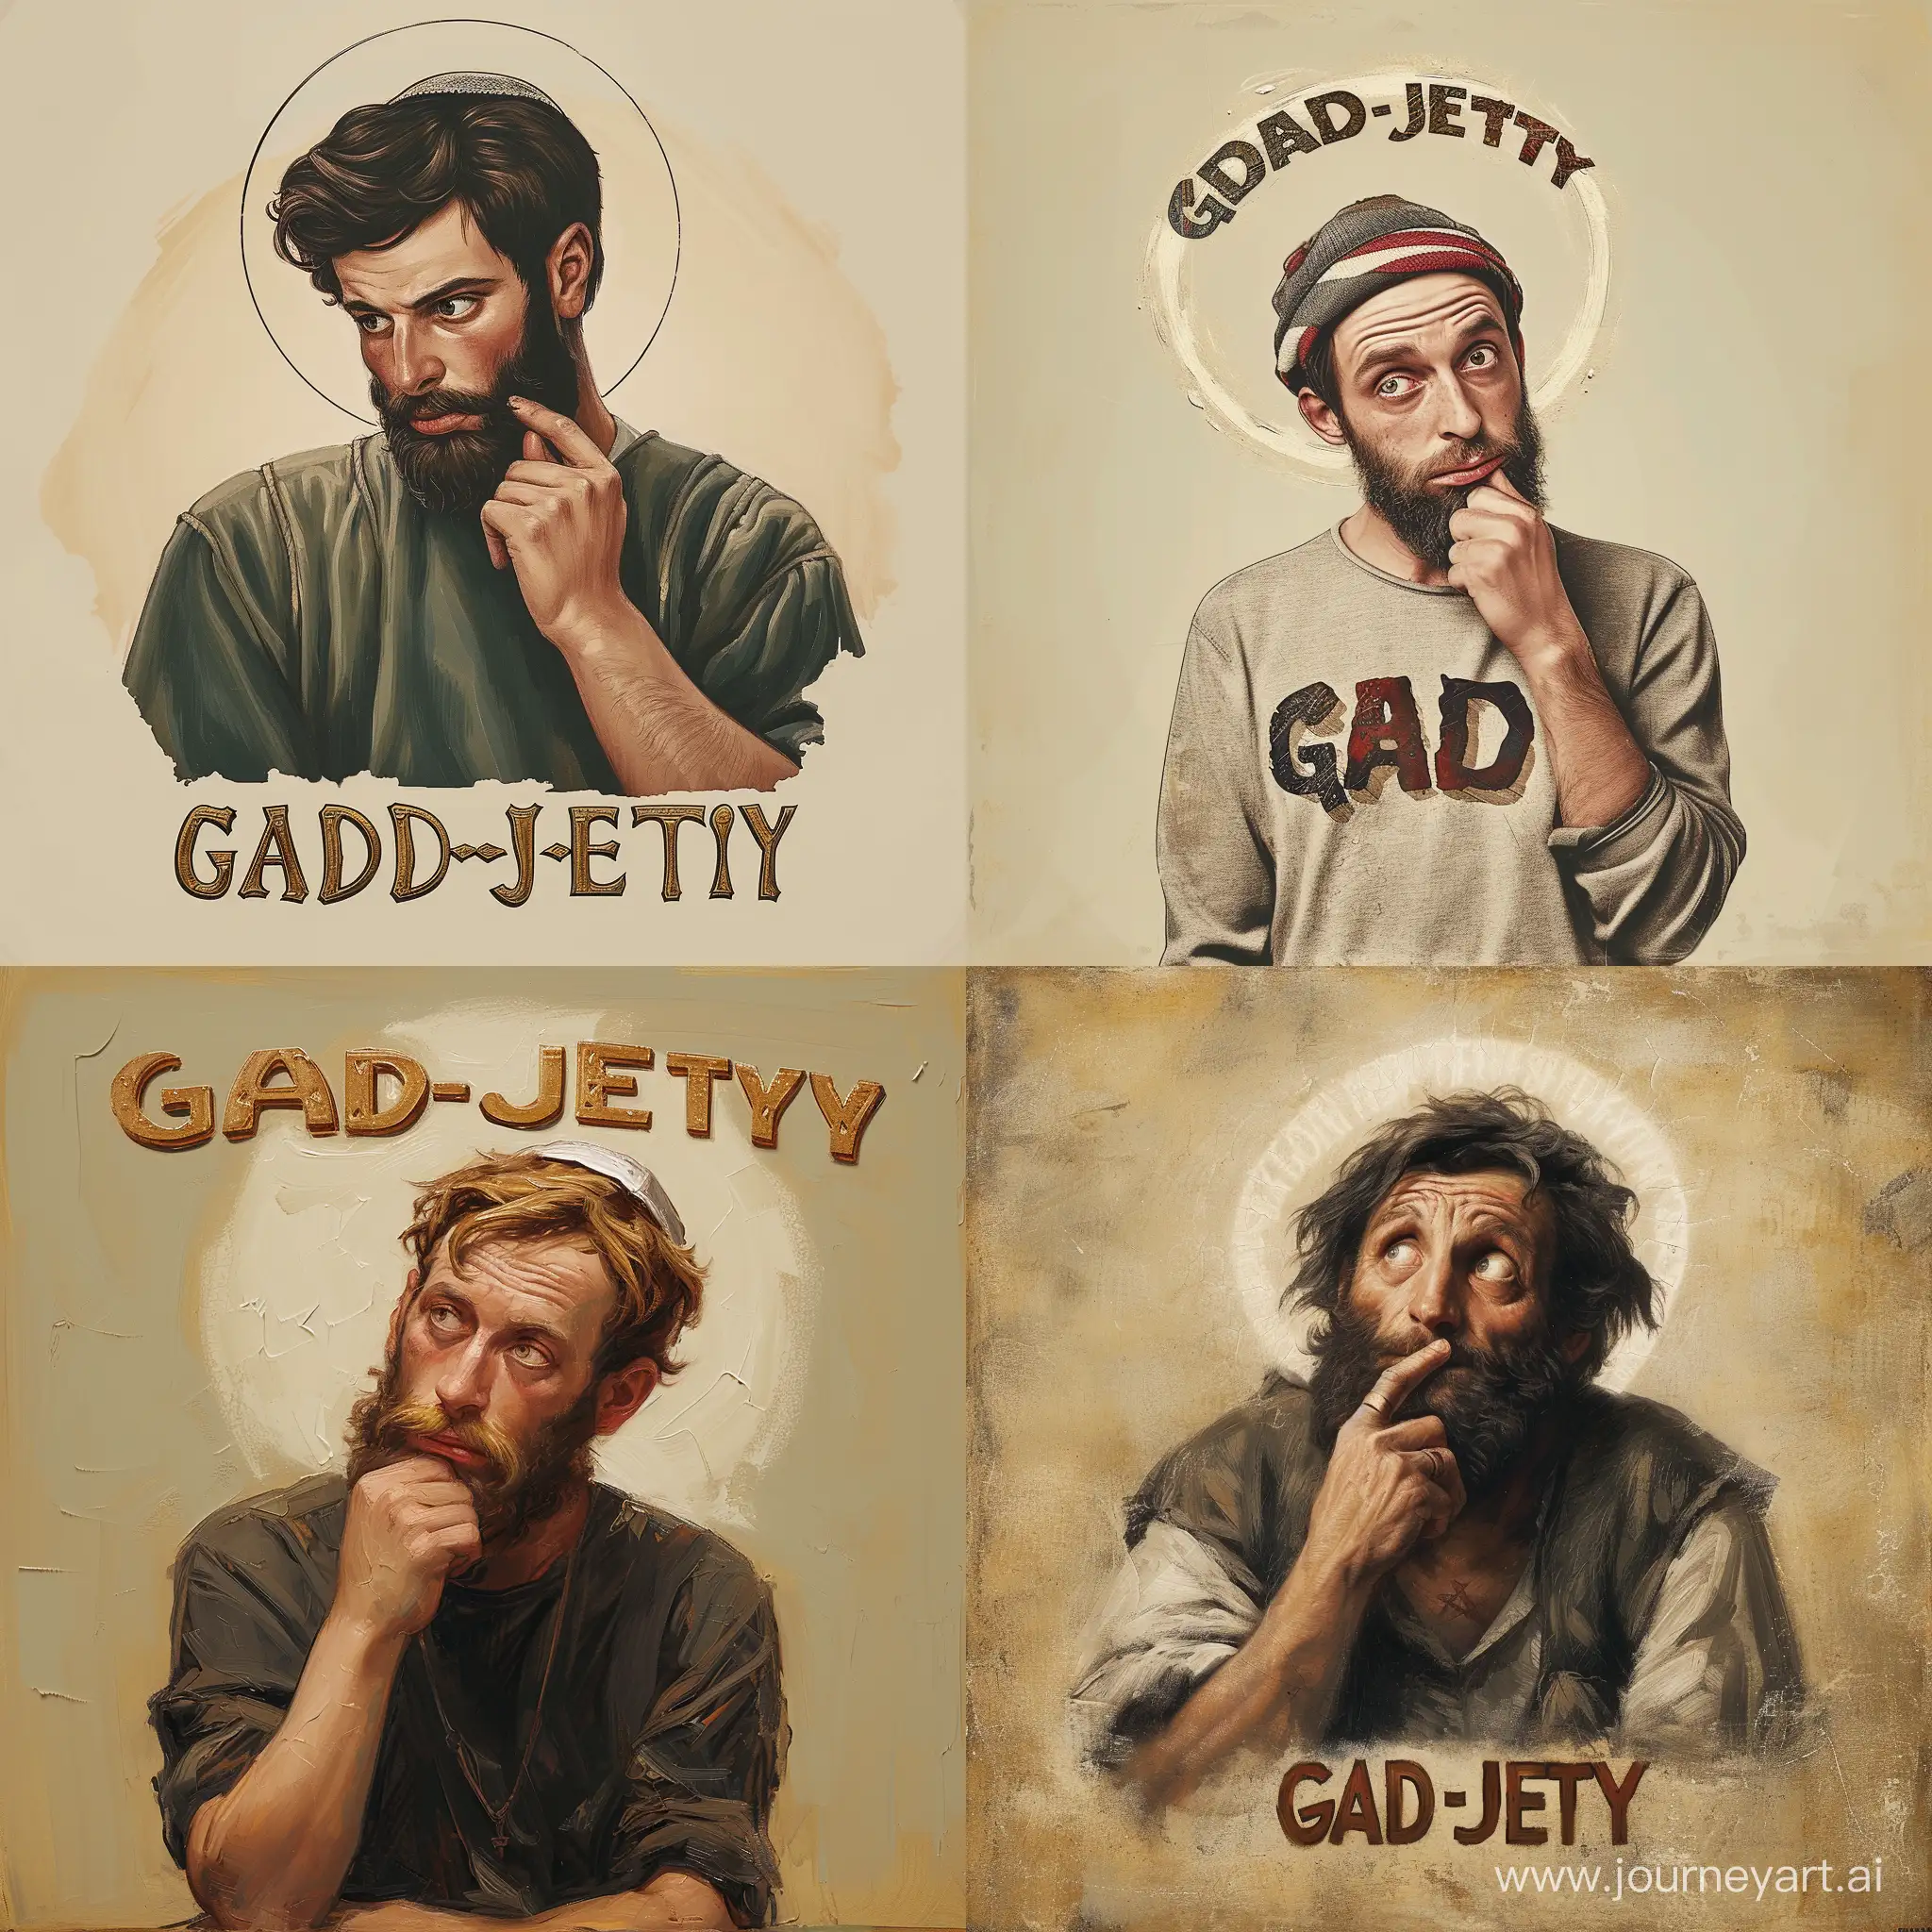 Pensive-Jew-Contemplating-GADJETY-with-Curiosity